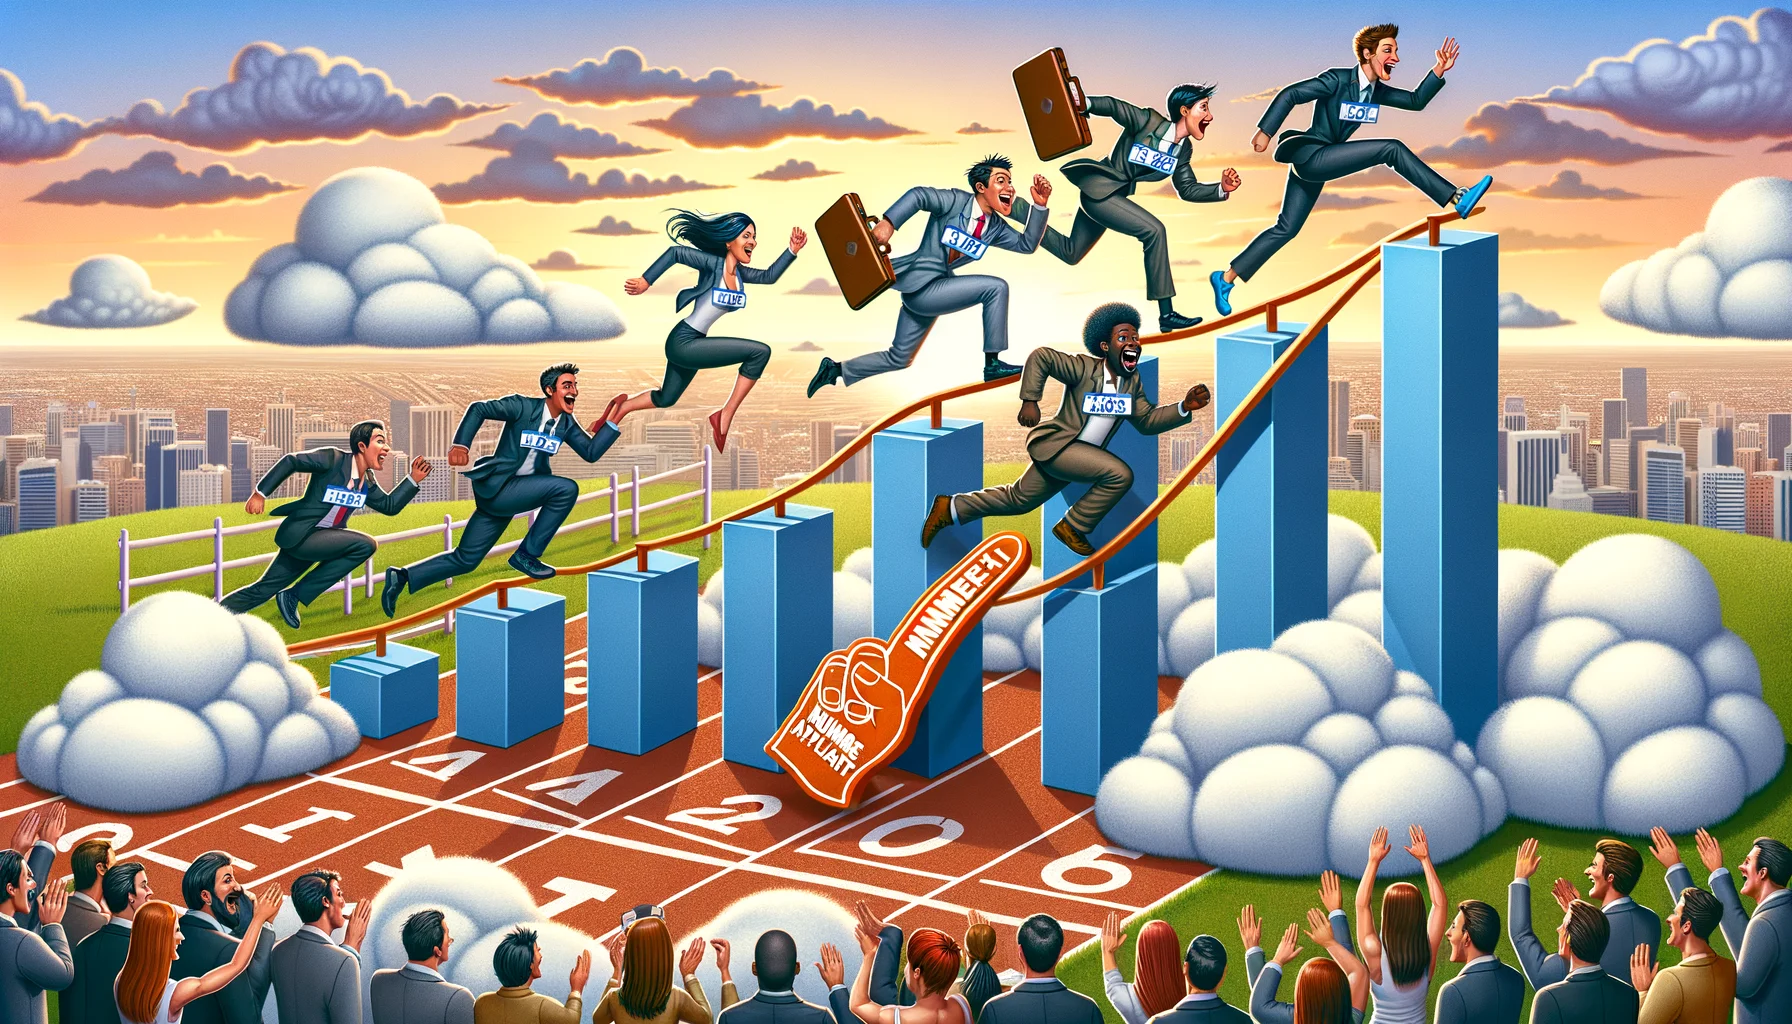 Imagine a humorous scene featuring an affiliate summit event in 2016. Picture this: an unexpected agility race where the participants are climbing over huge bar charts and sliding down gigantic trend lines created from fluffy clouds that symbolize data analytics. The competitors are of various genders and descents - an African man, an Asian woman, a Caucasian man and a Middle-Eastern woman, all wearing suits and ties. They are laughing as they're racing, comically trying to balance their laptops and gigantic foam fingers that say 'Number One Affiliate'. There's an audience in the background, cheering and laughing. The backdrop showcases a sunset over a city skyline.